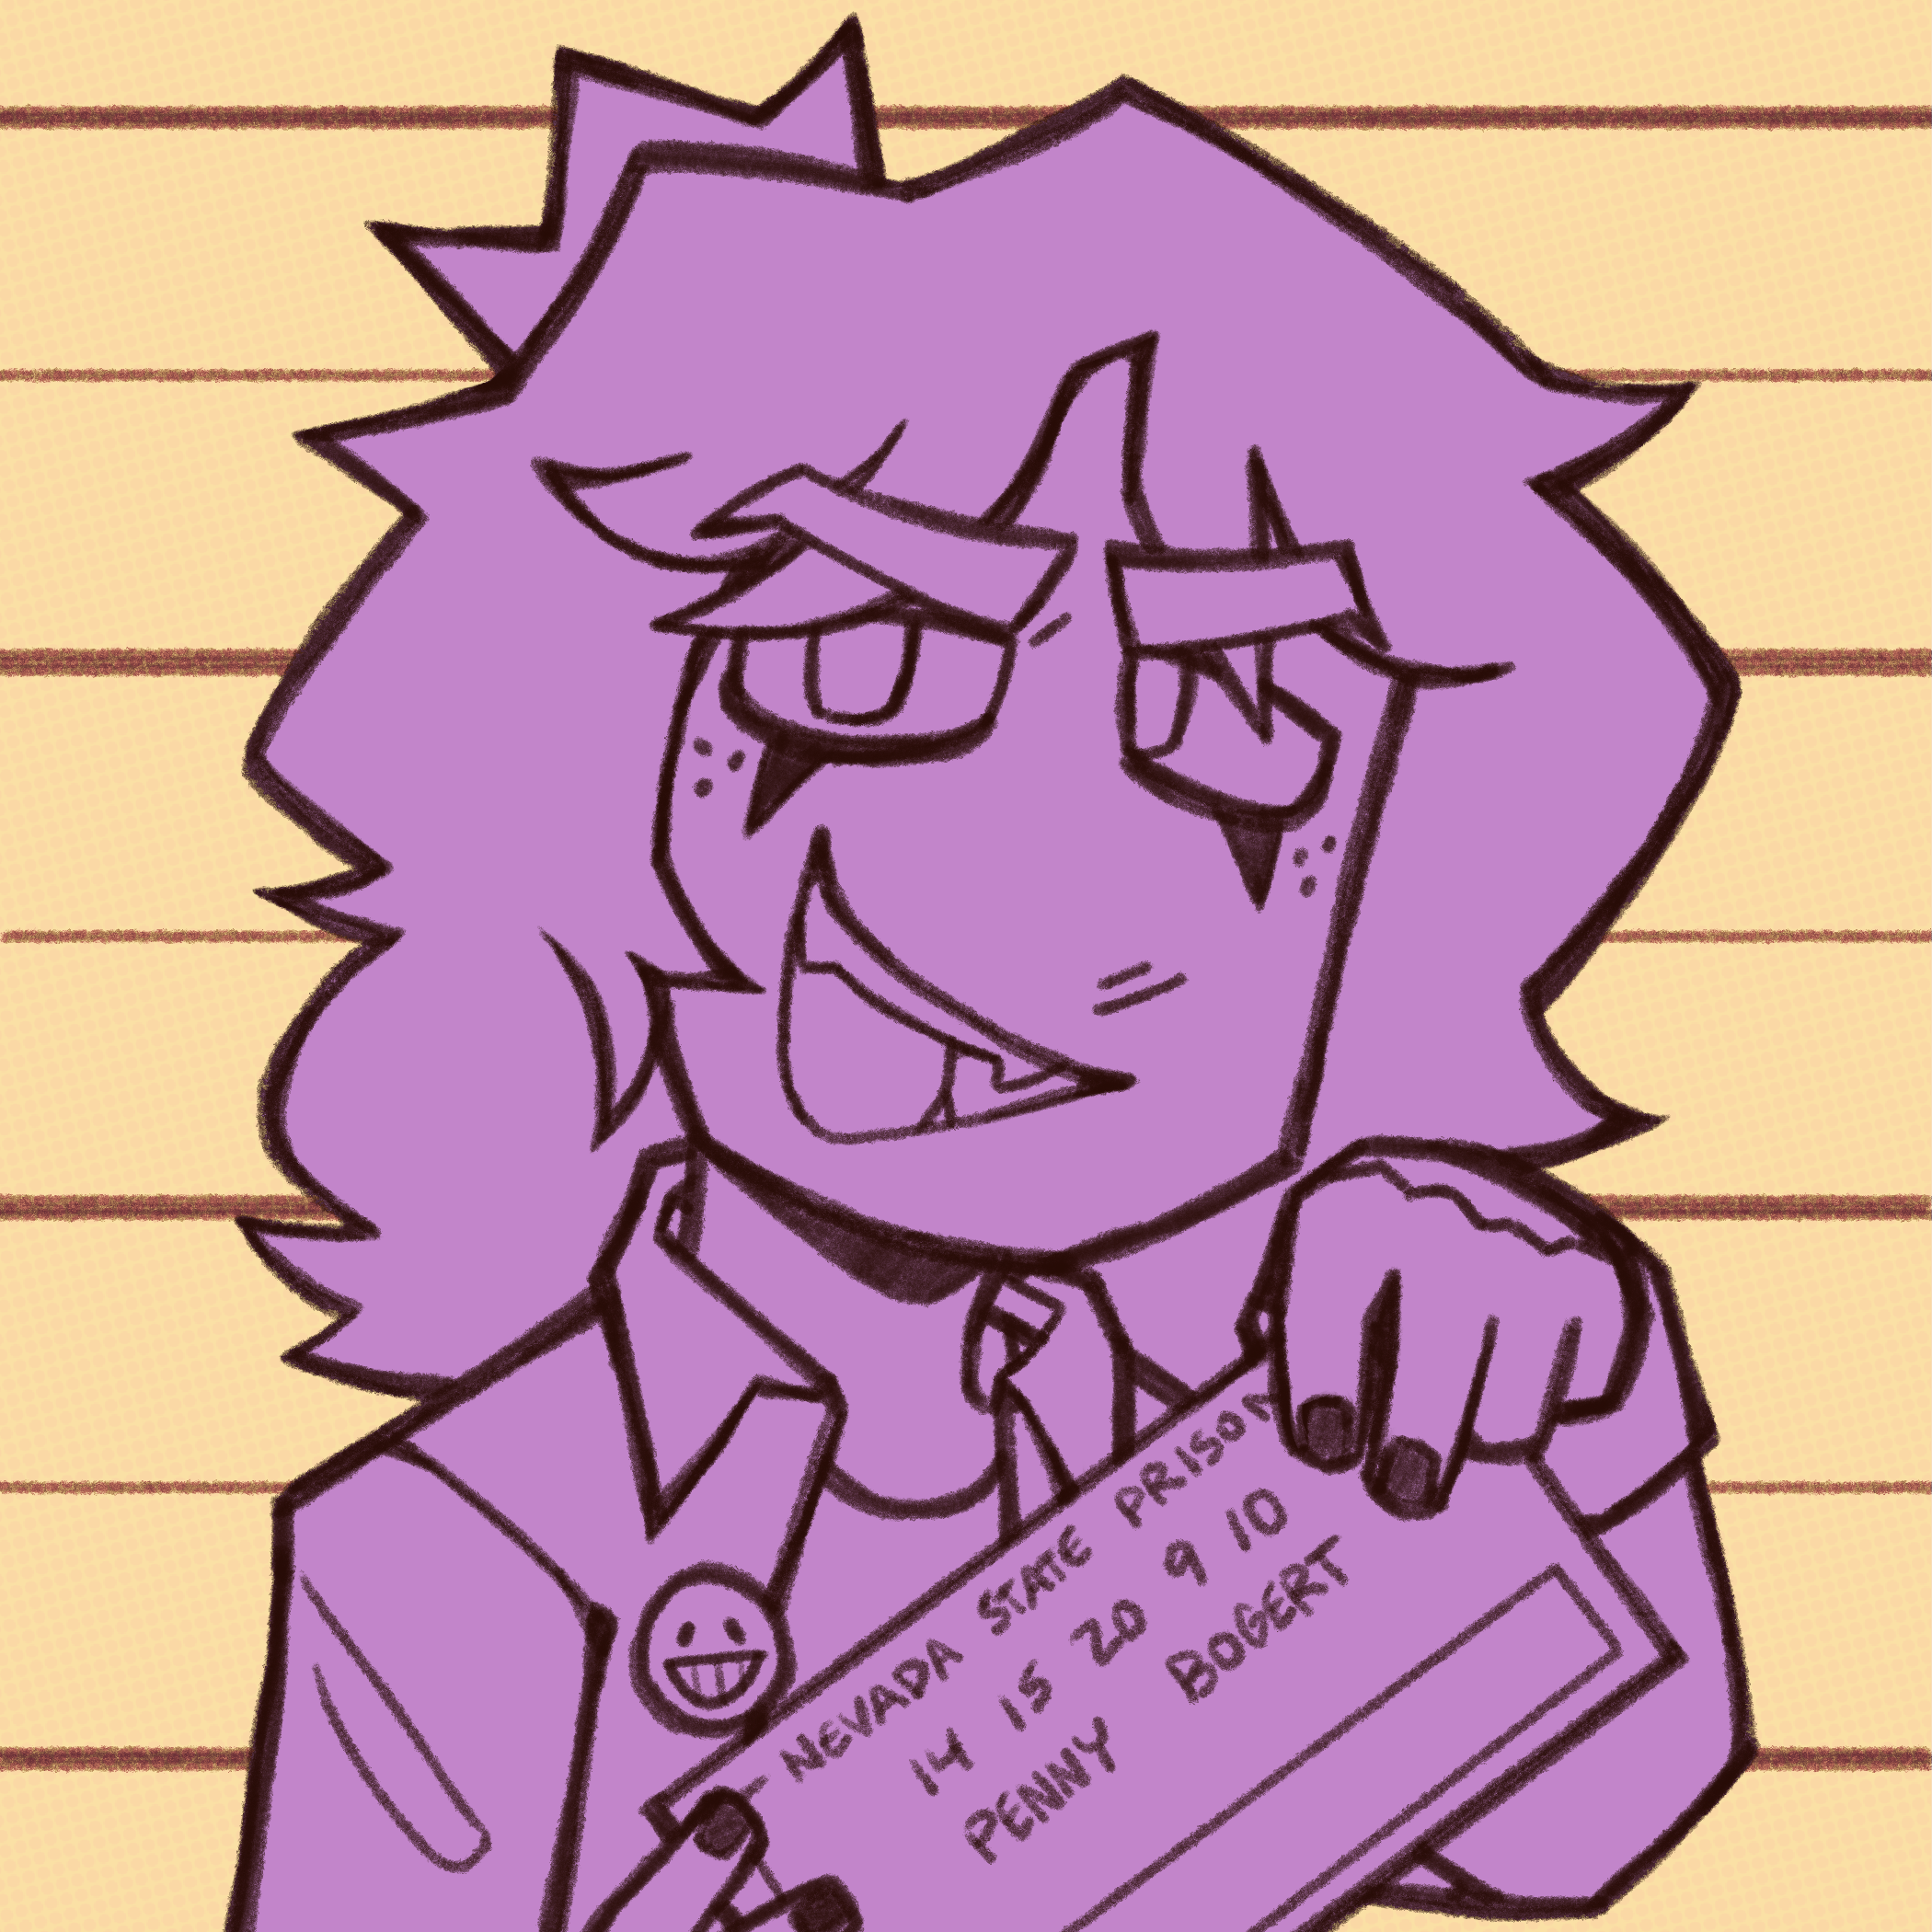 A bust portrait of Penny Bogert looking smug while holding a placard that reads 'NEVADA STATE PRISON, 14 15 20 9 10, PENNY BOGERT'